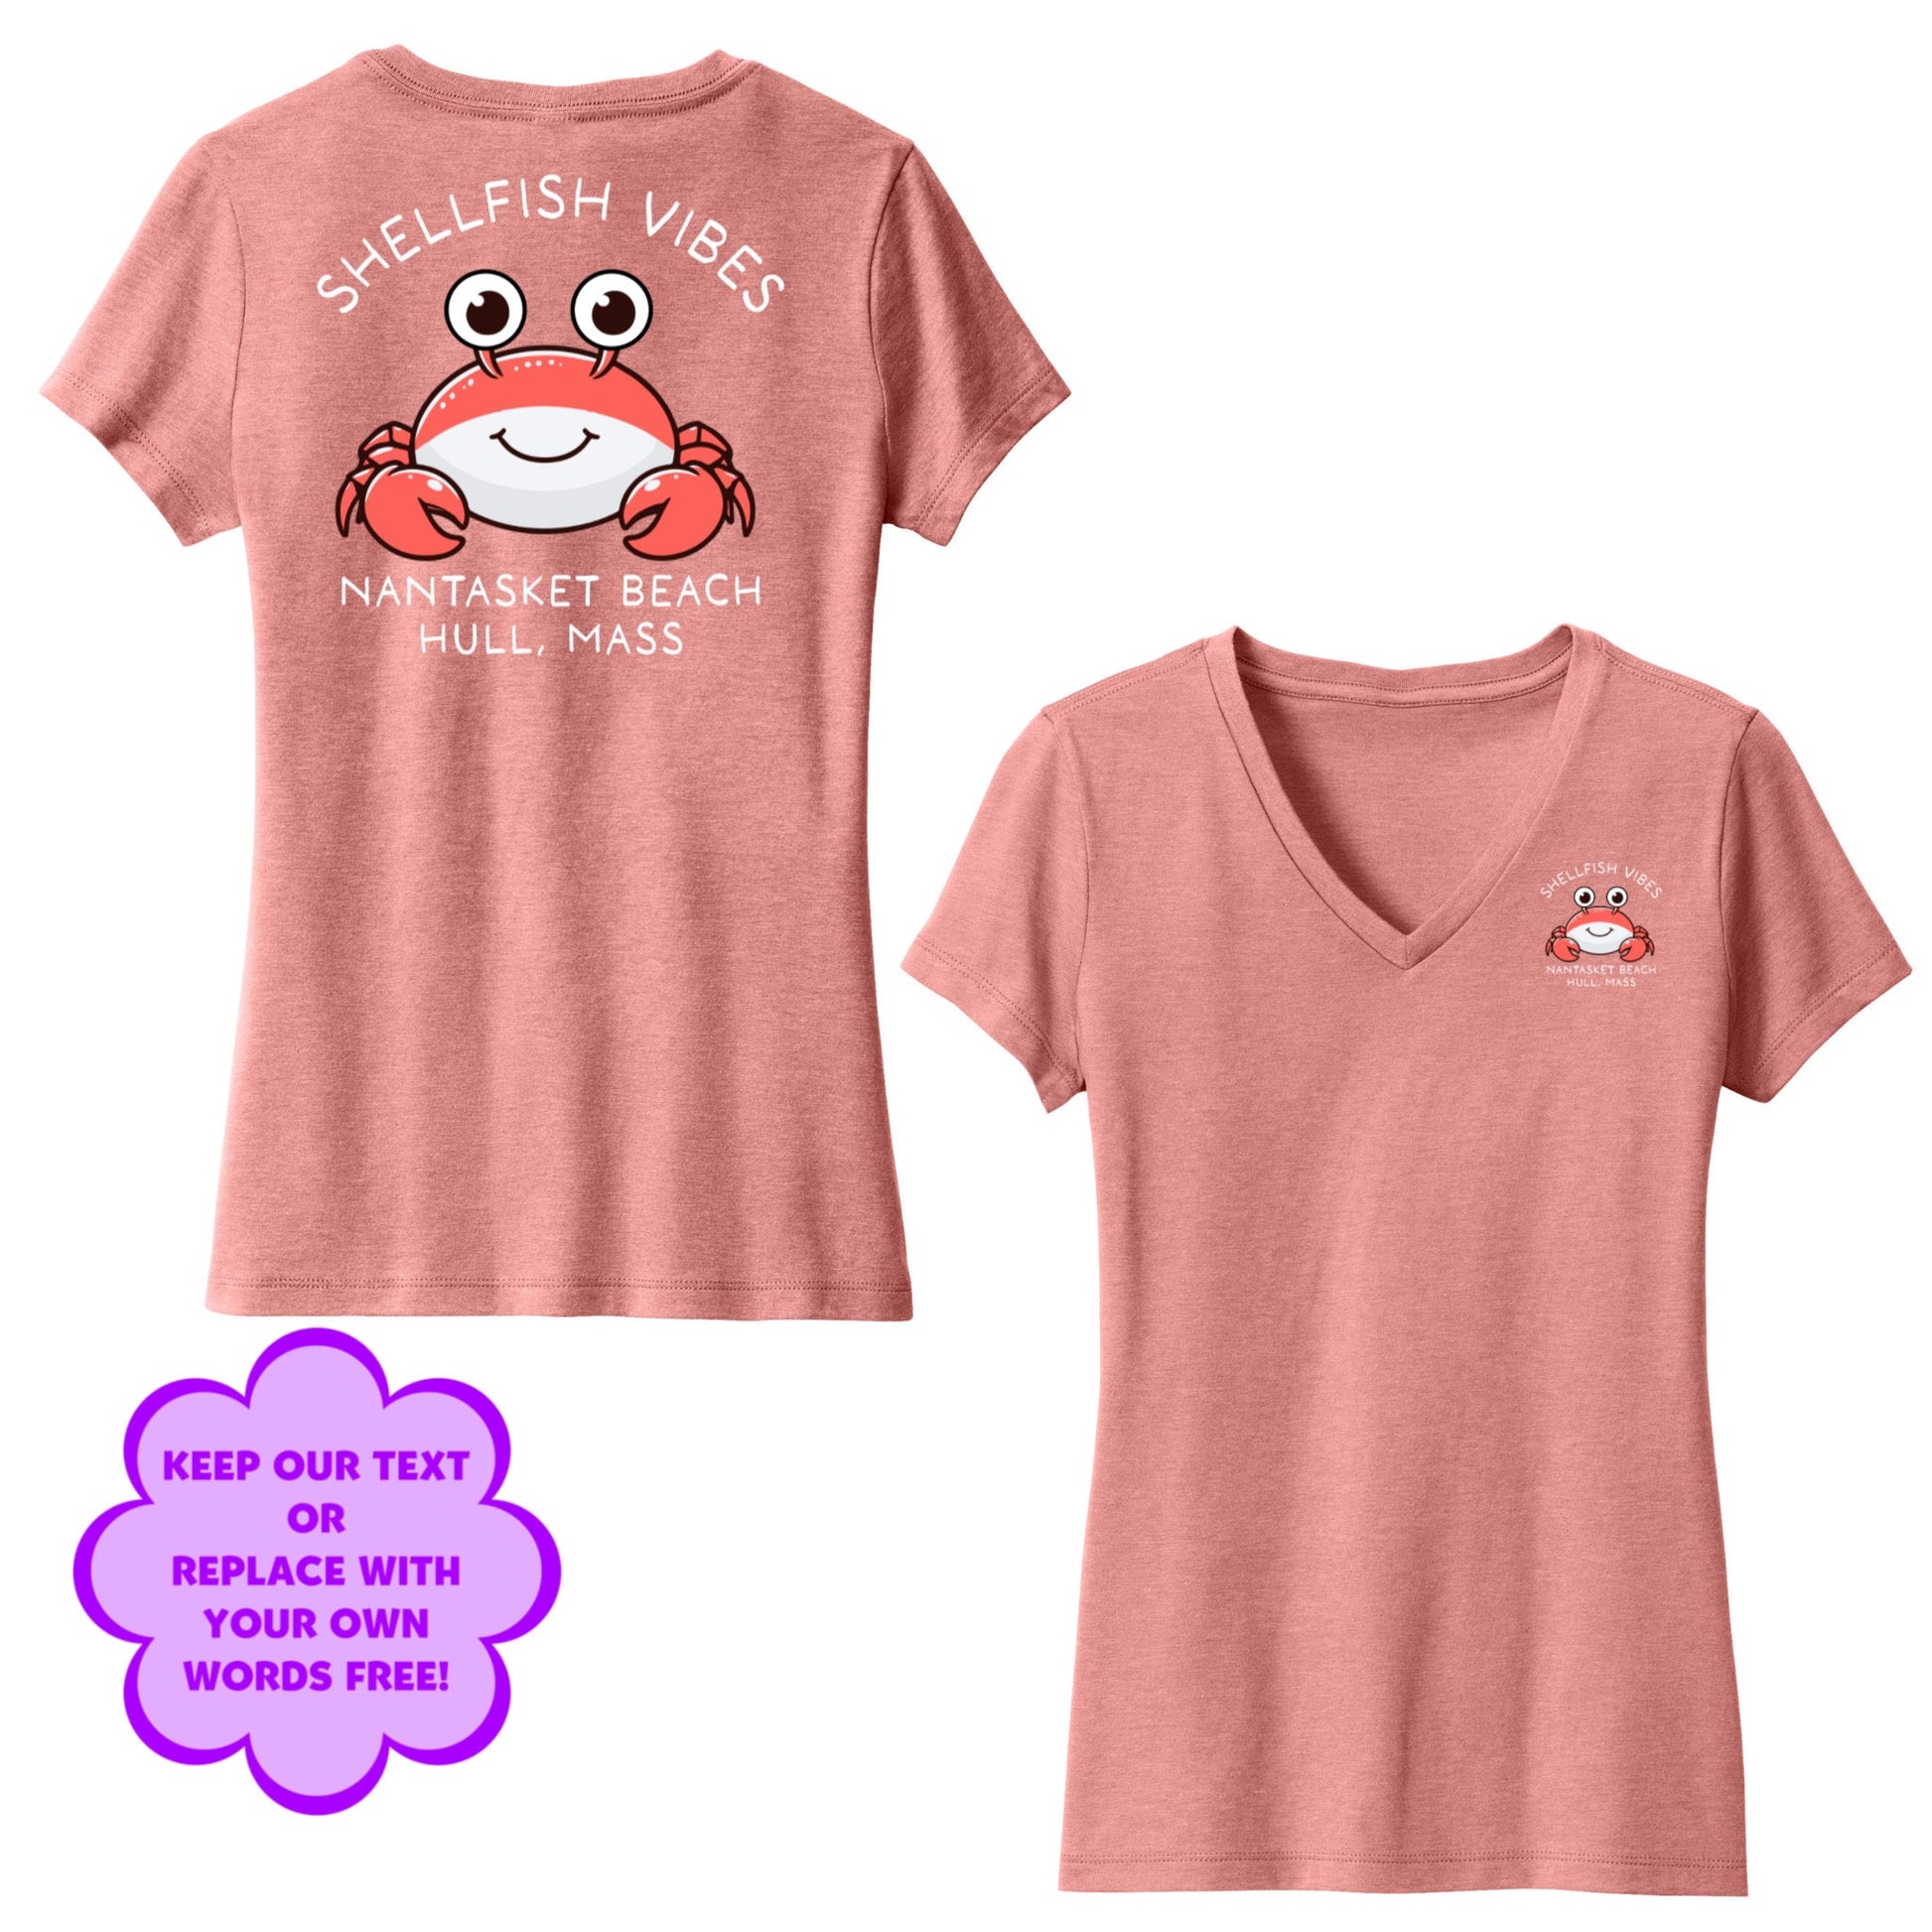 Personalize Free Beach Crabs, Hull, Women’s Cotton Tees from Baby Squid Ink 